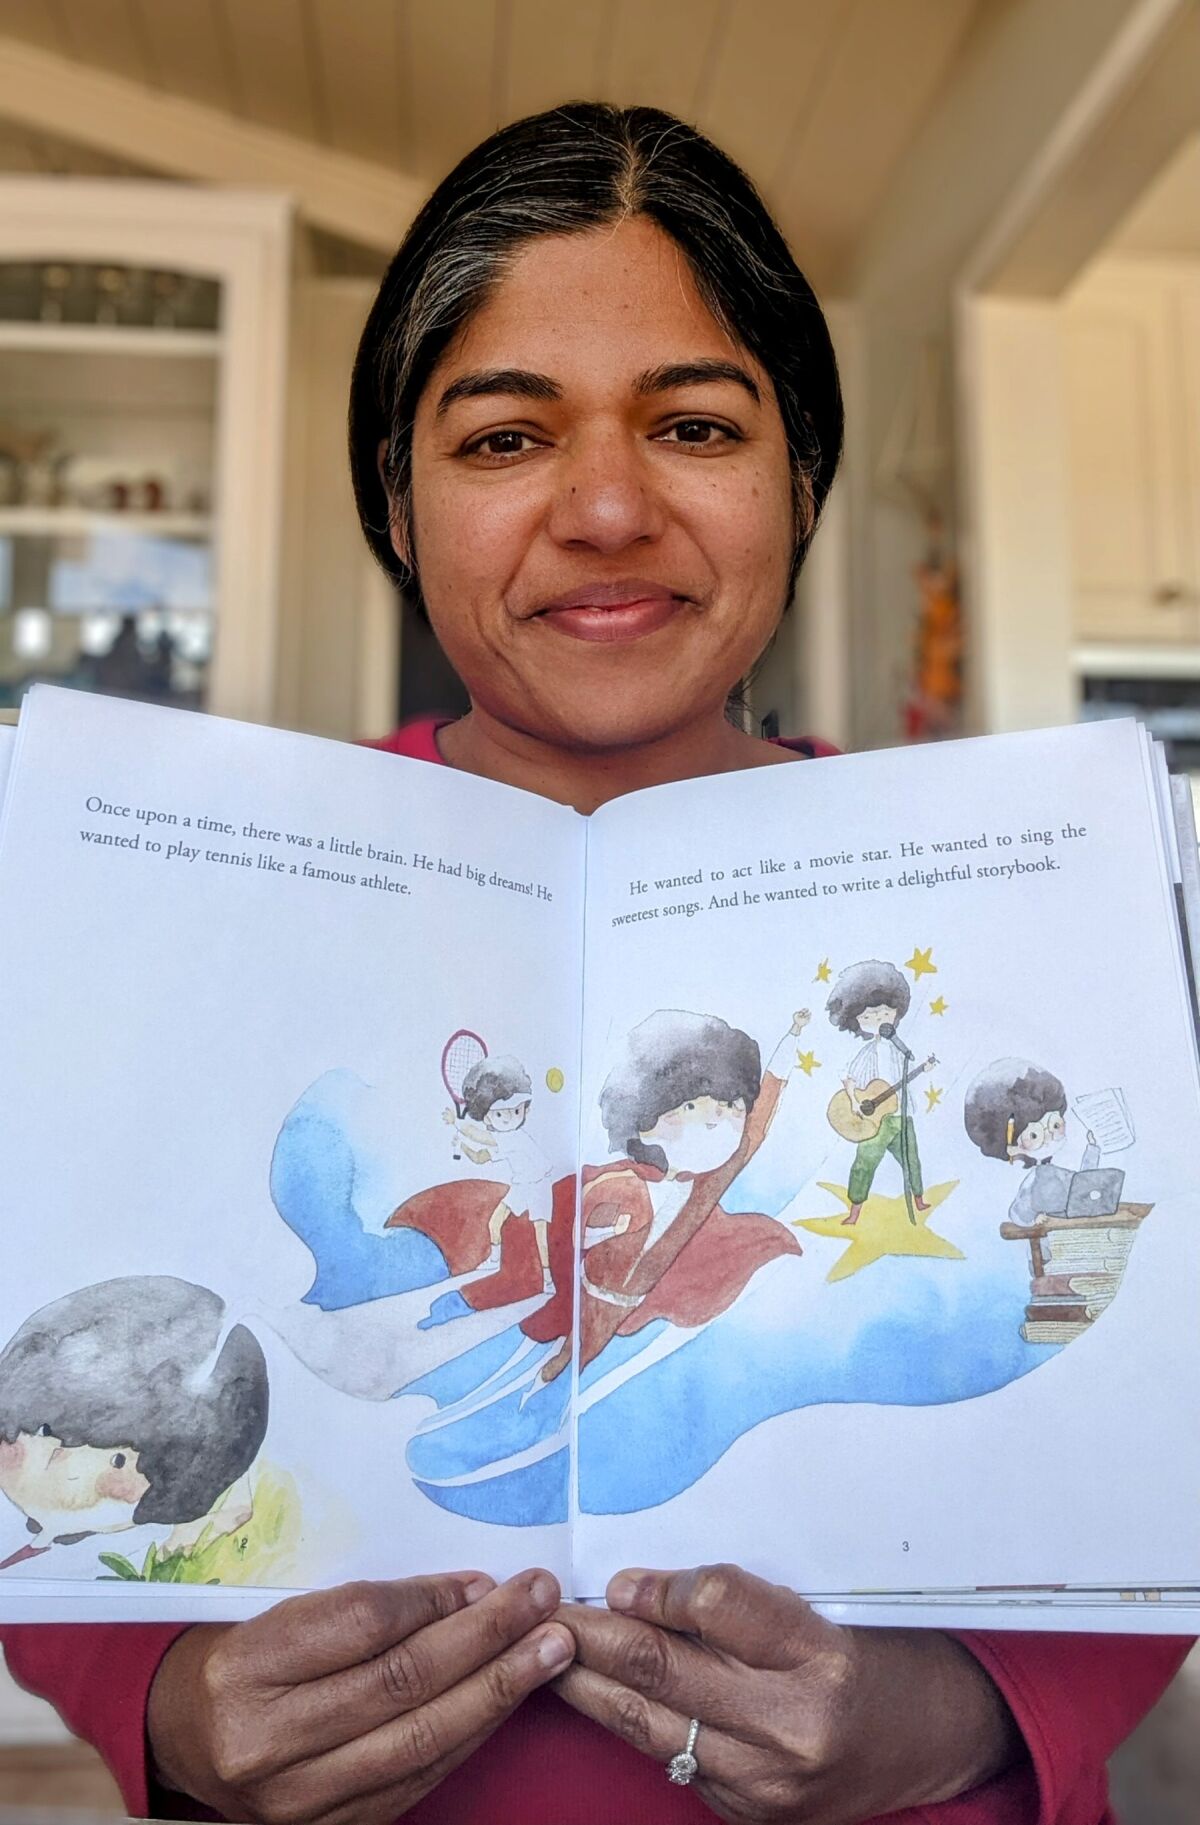 Author Jyoti Mishra showing the illustrations by Grace Wiguna for her children's book "The Little Brain".